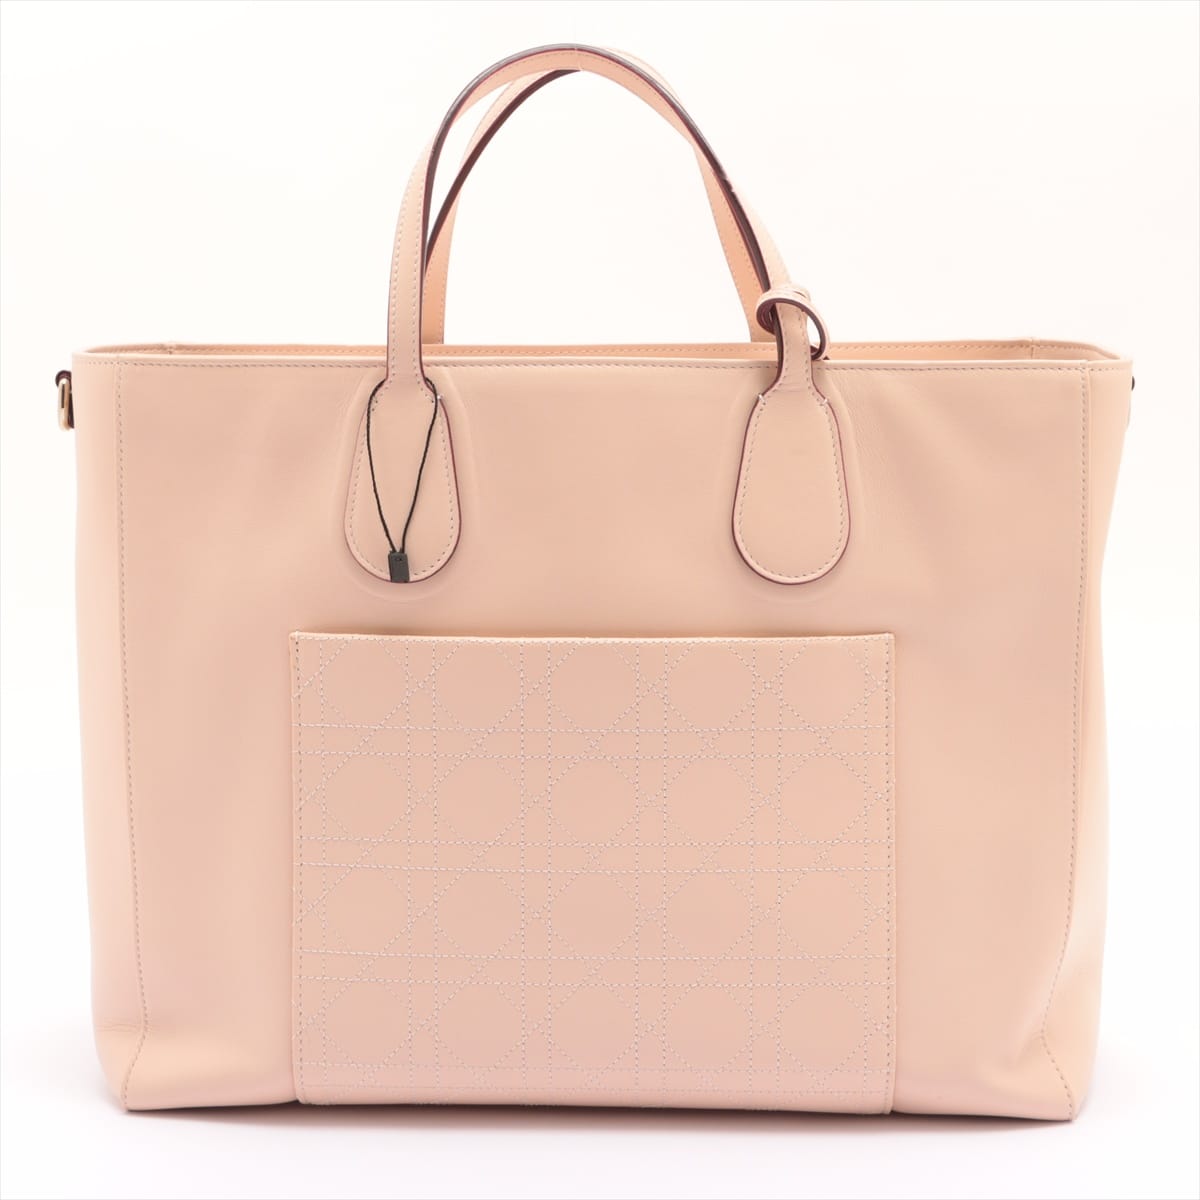 Christian Dior Cannage stitch Leather 2 way tote bag Pink beige open papers with pouch